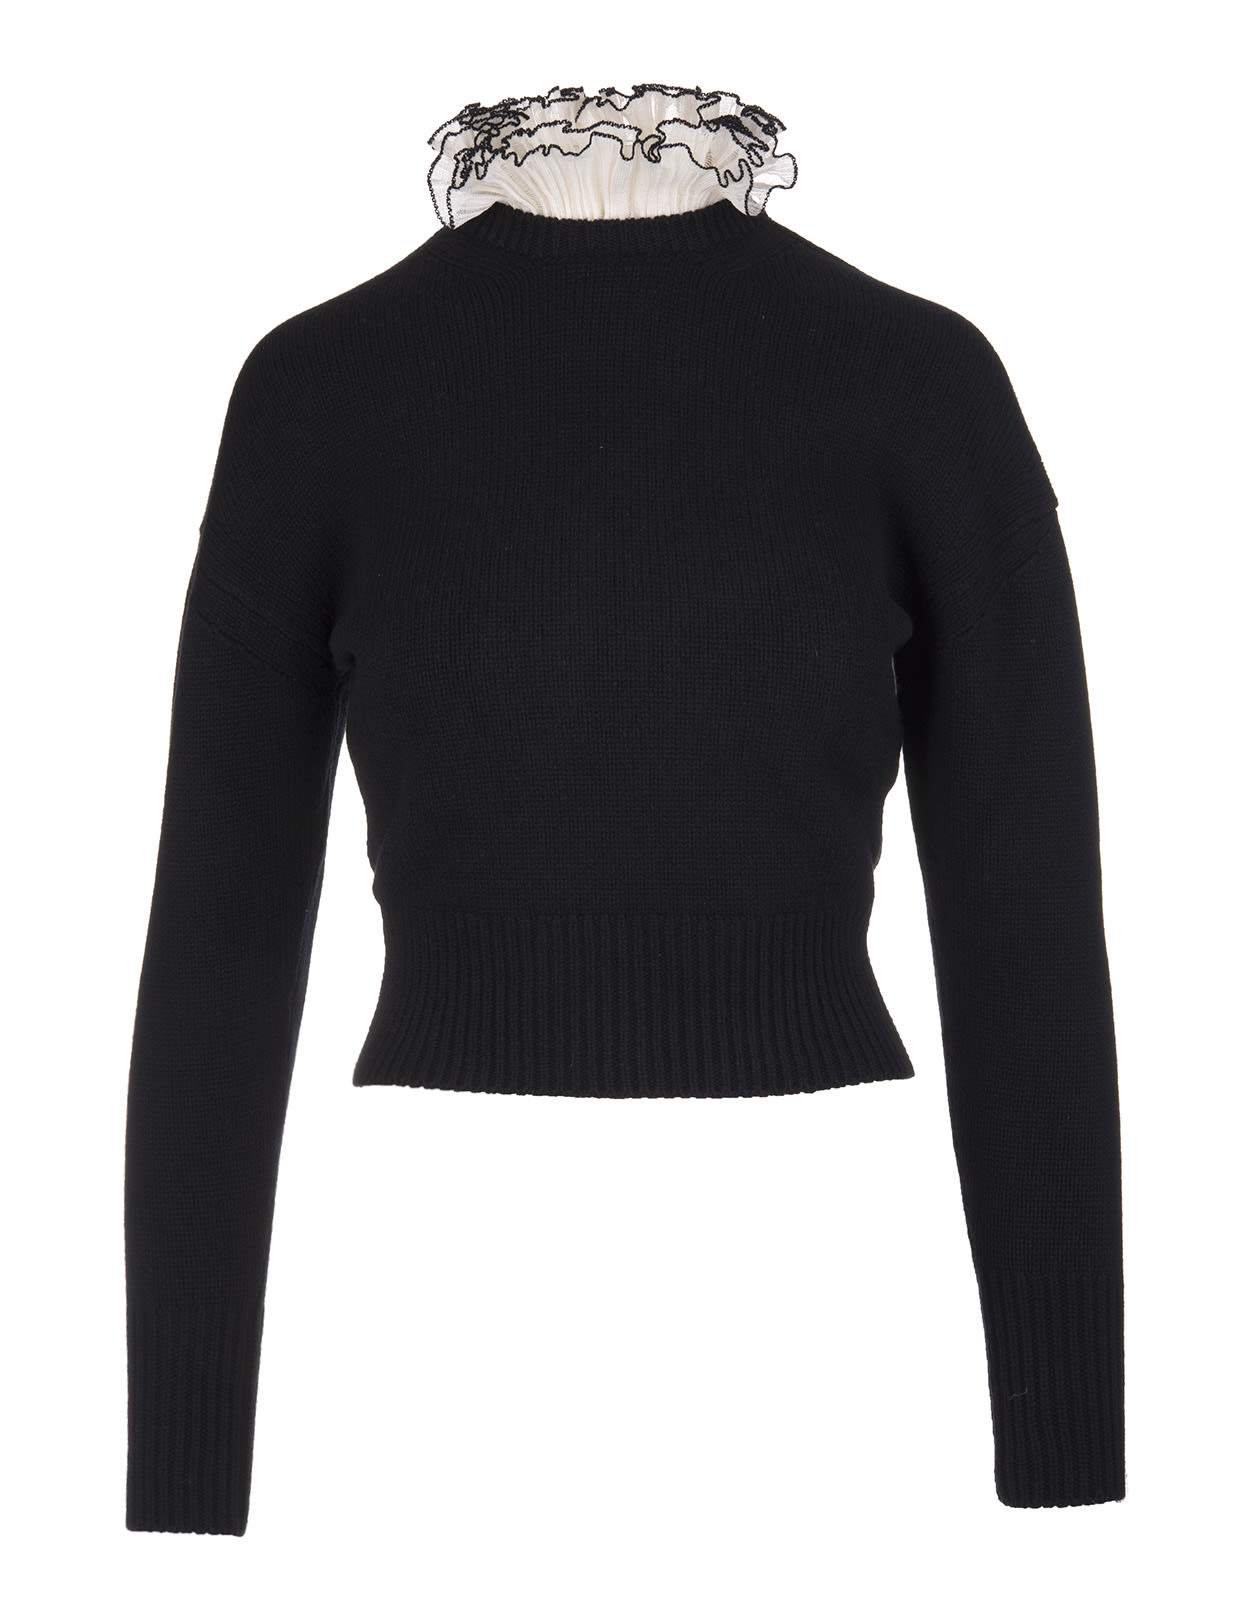 Alexander McQueen Woman Black Sweater With Ruches Detail